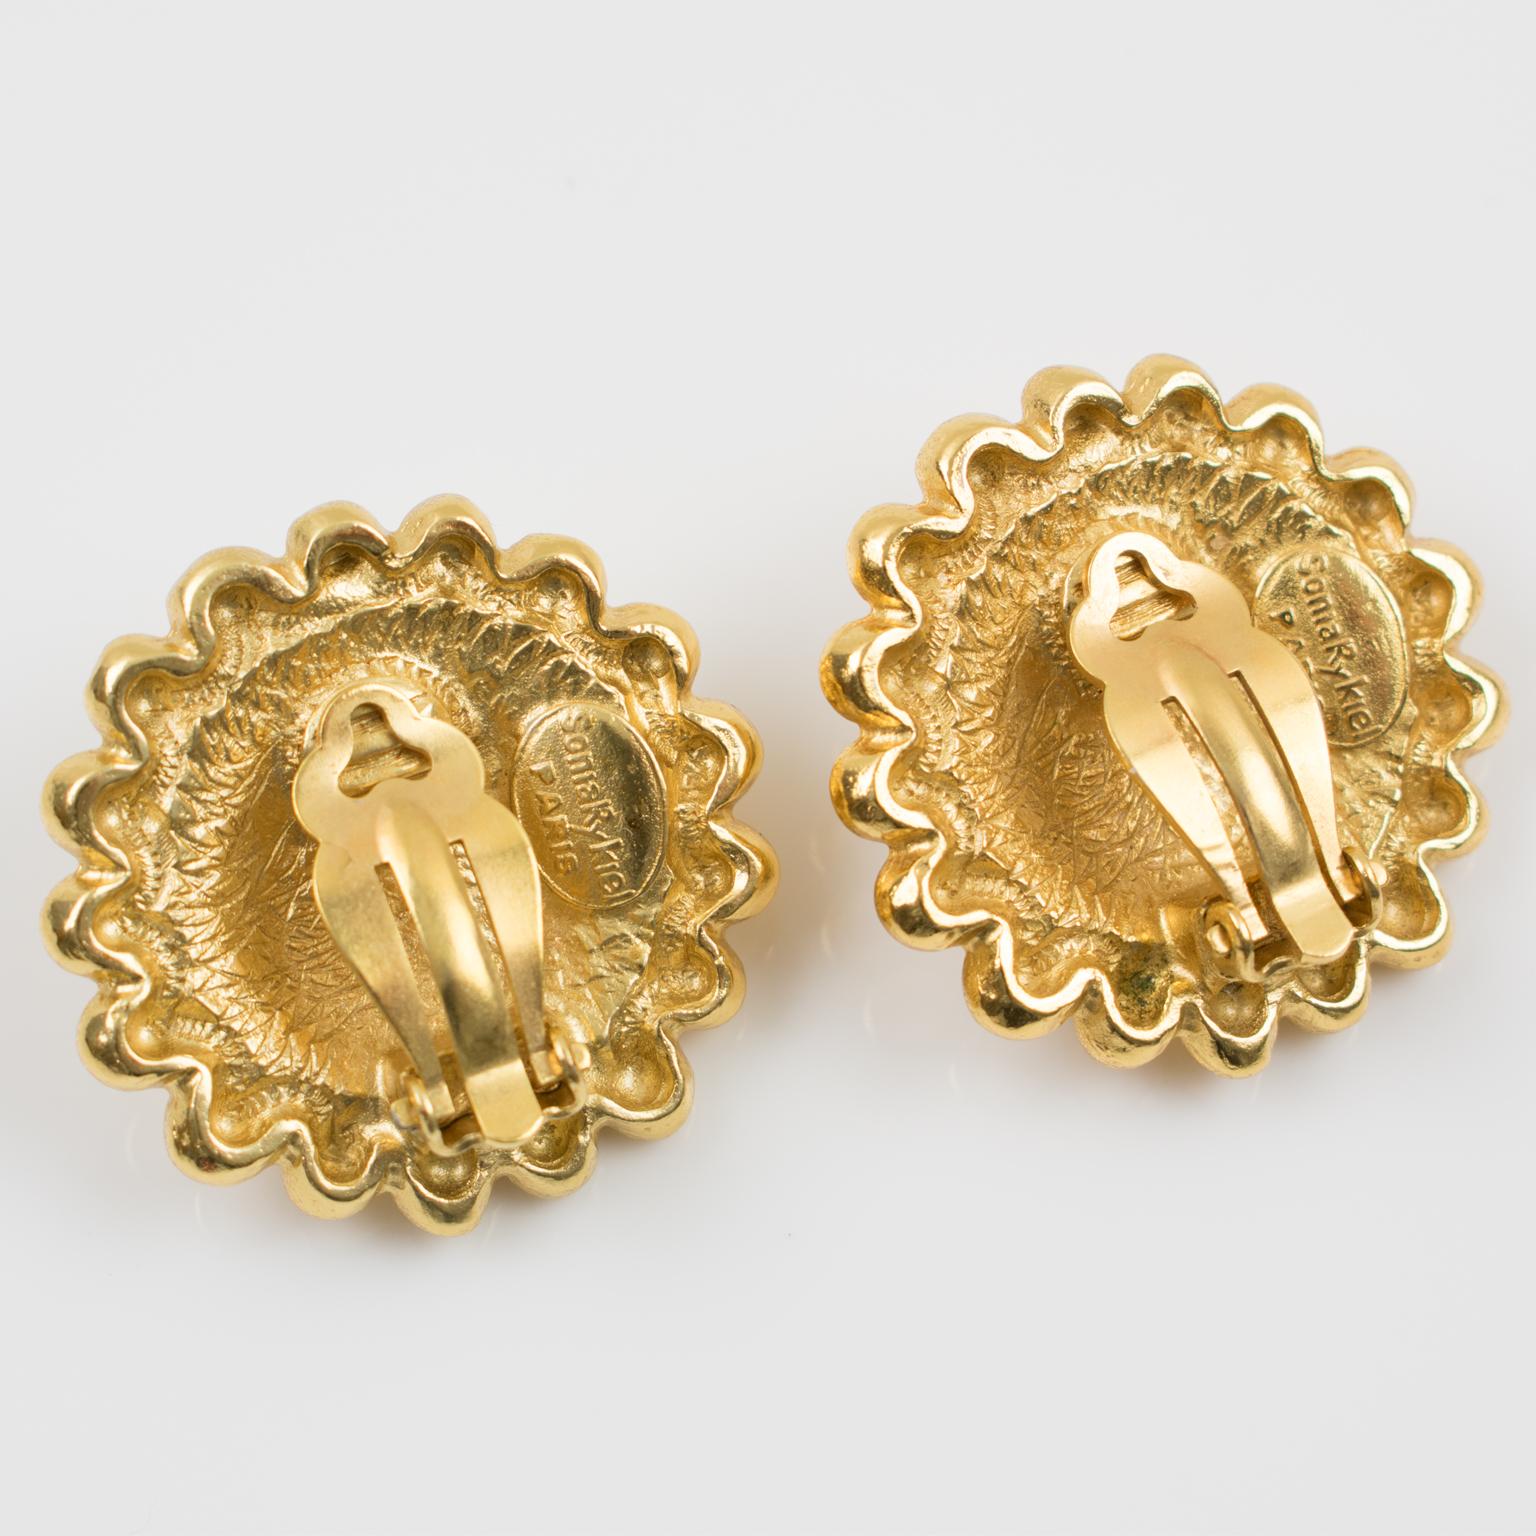 Modern Sonia Rykiel Jeweled Clip Earrings with Yellow Resin Cabochons For Sale